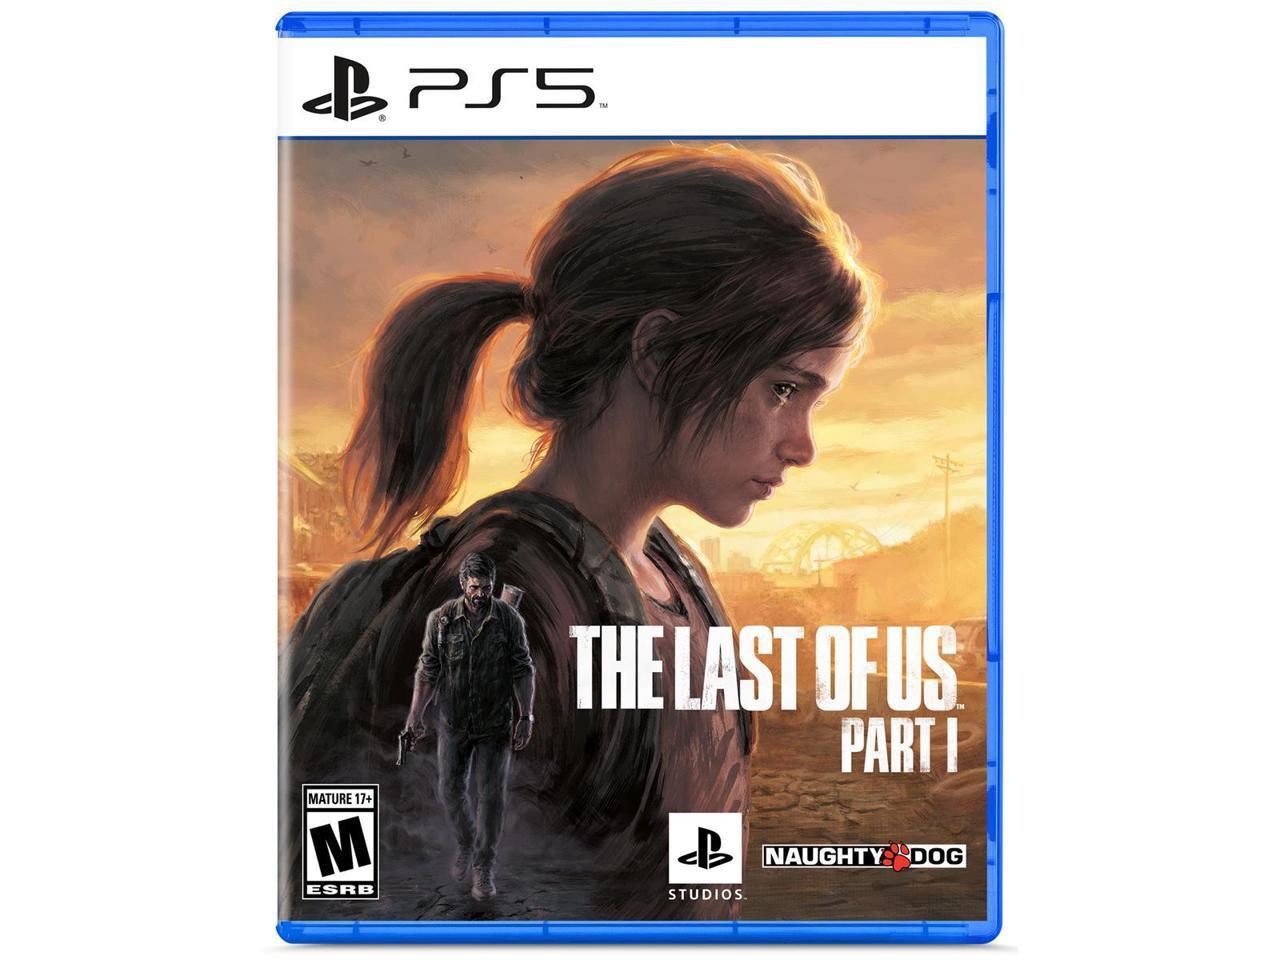 The Last of Us Part I - PlayStation 5 